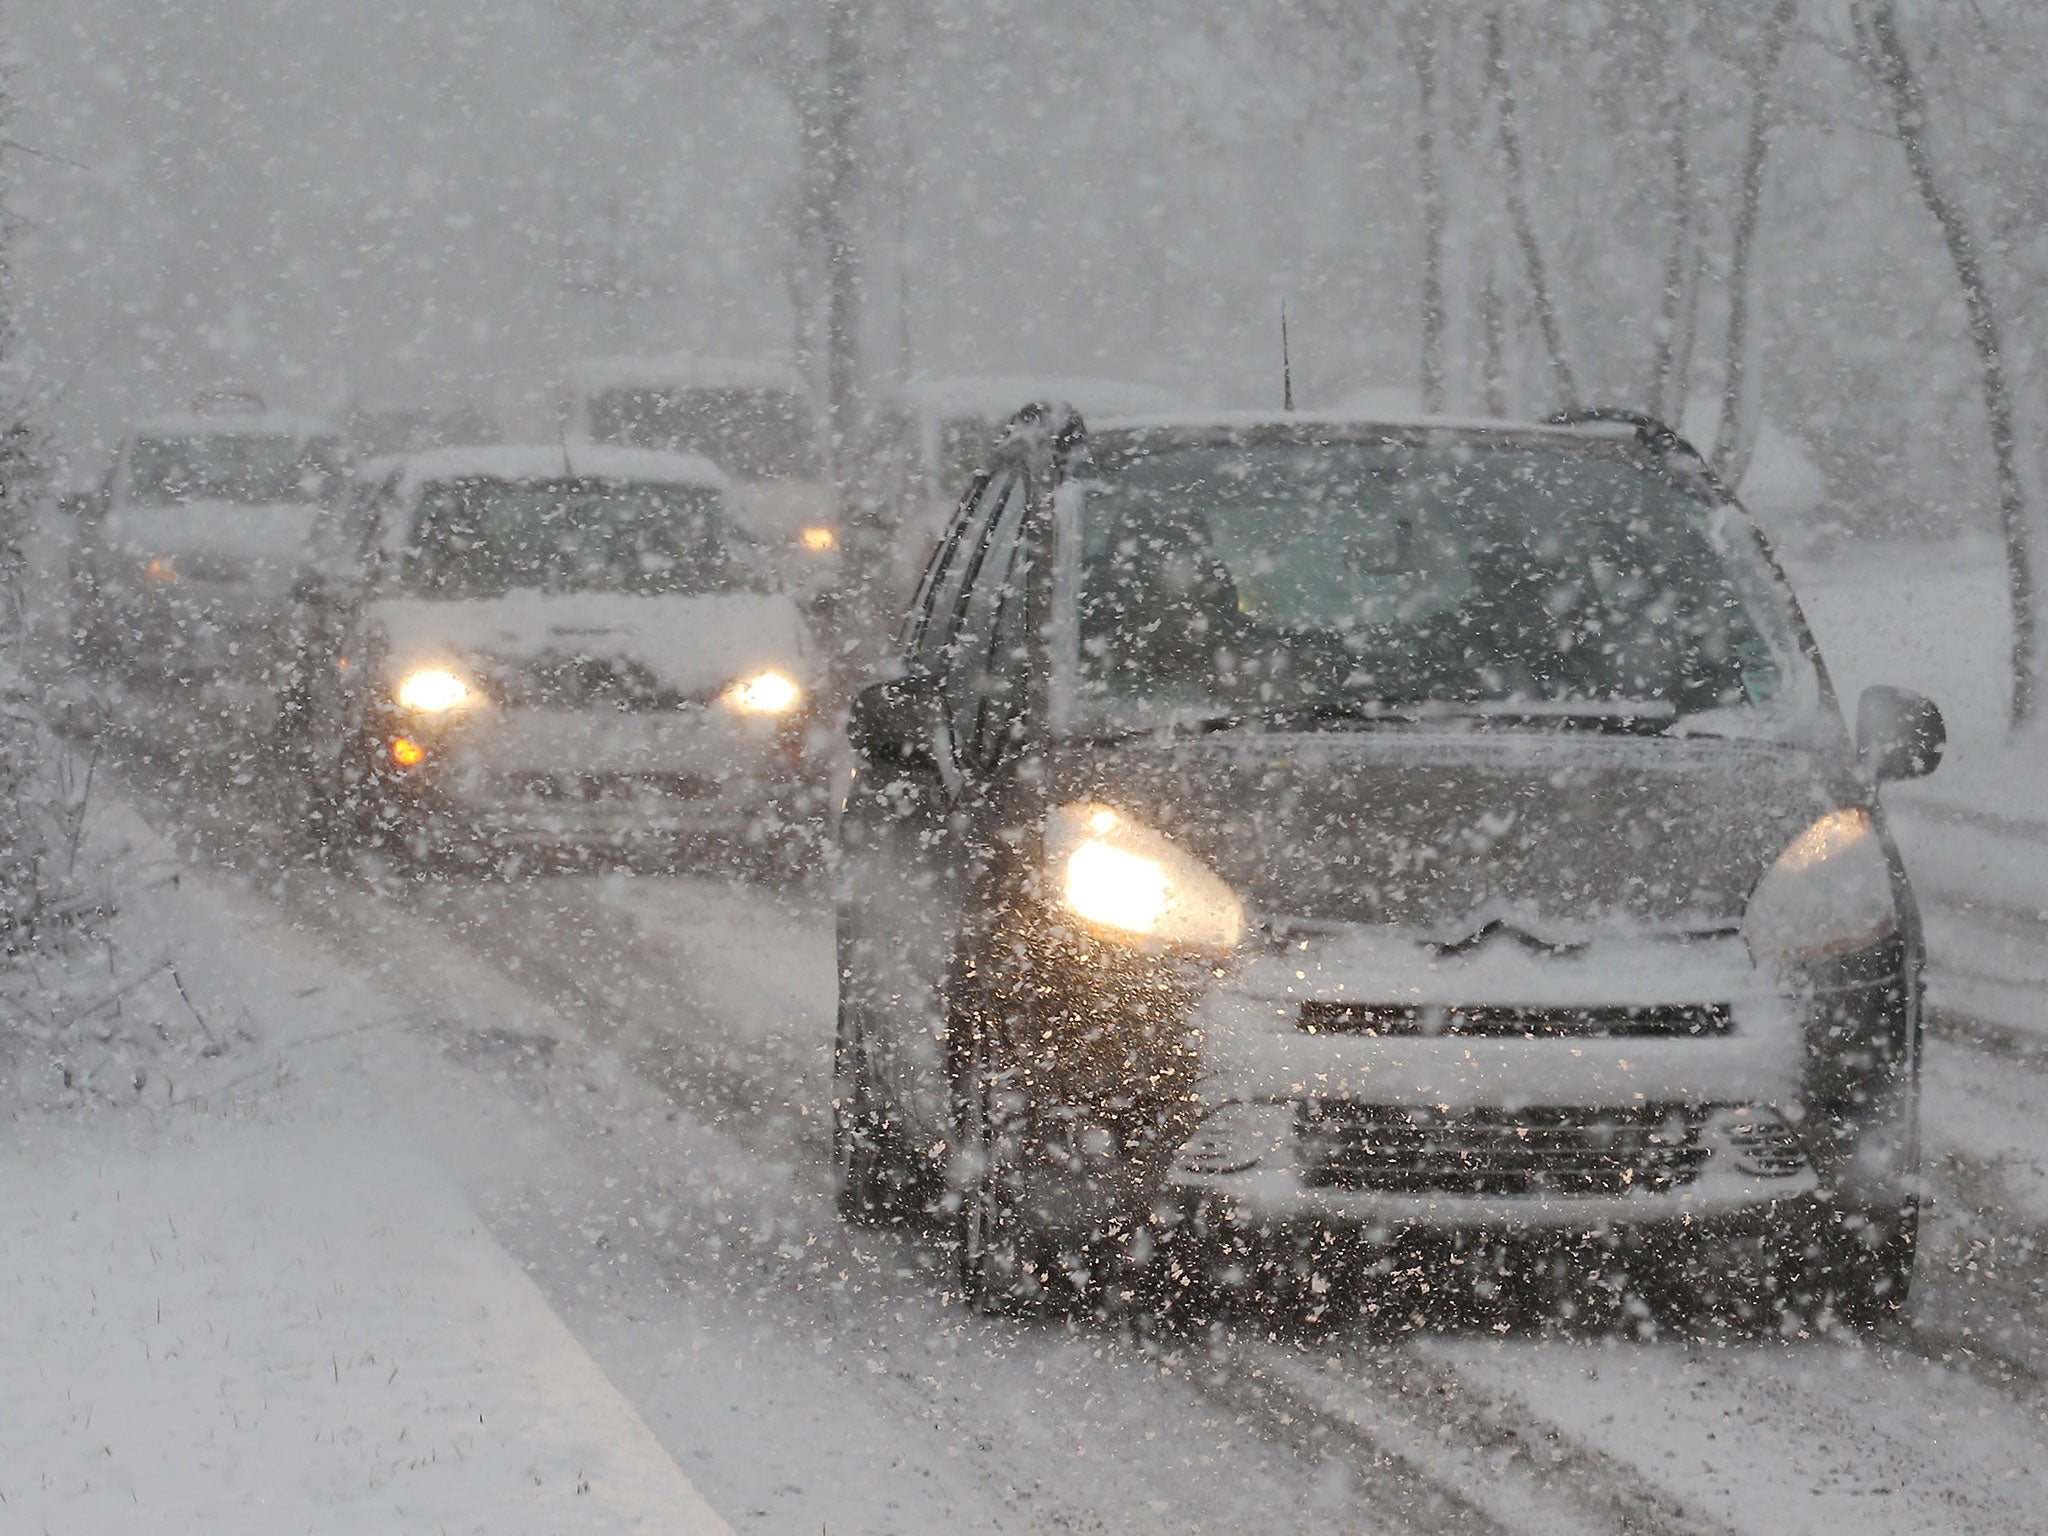 Cars struggle through the snow in West Ewell, England.